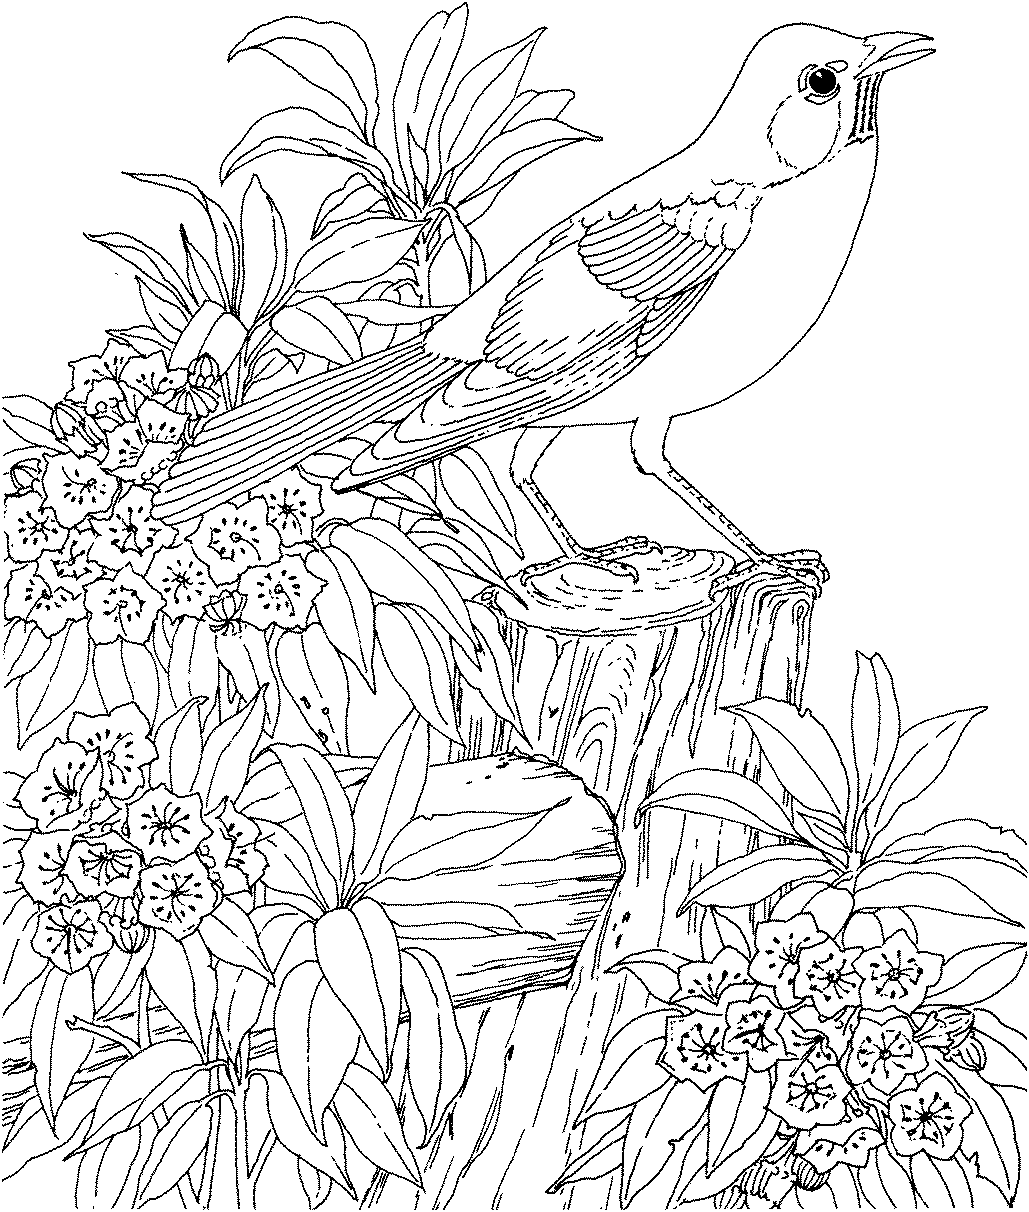 Hard Pictures To Color - Coloring Pages for Kids and for Adults